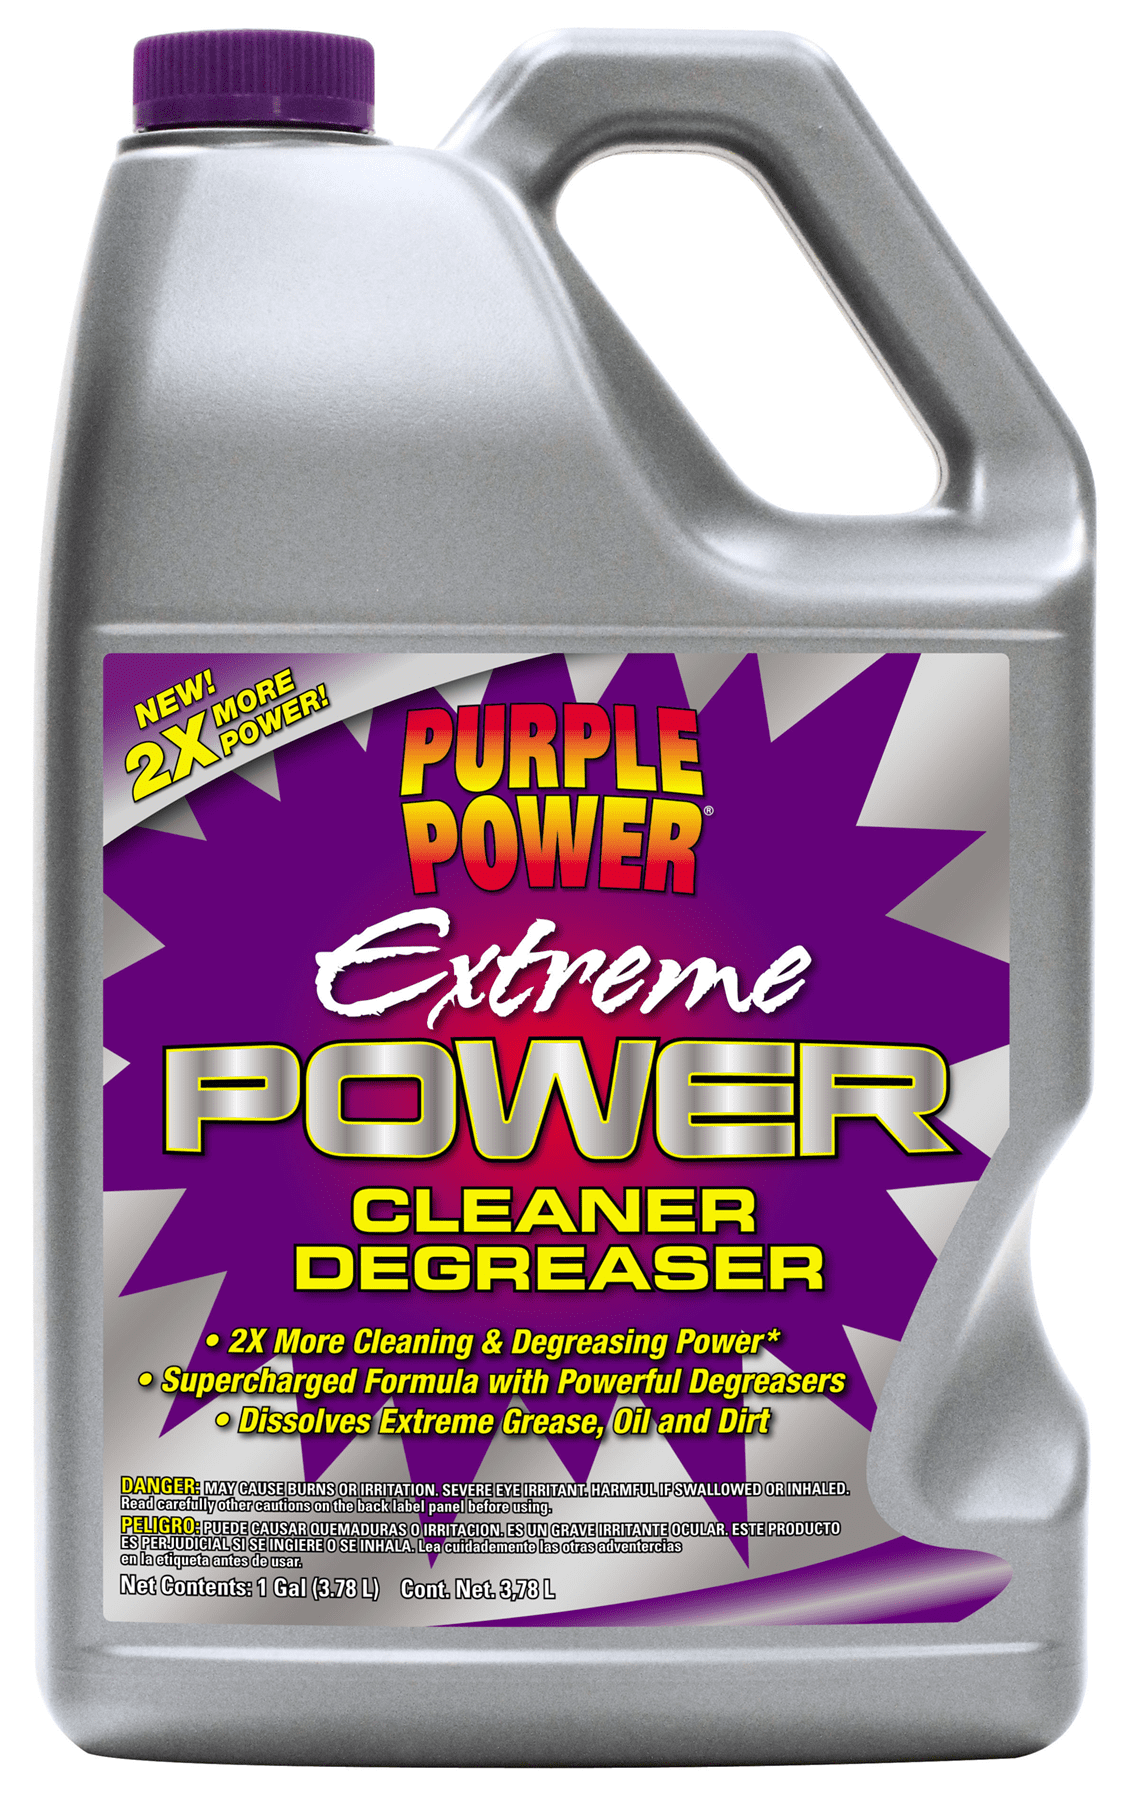 PURPLE POWER 4319PS Industrial Strength Cleaner and Degreaser - 40 oz. - 2  Pack